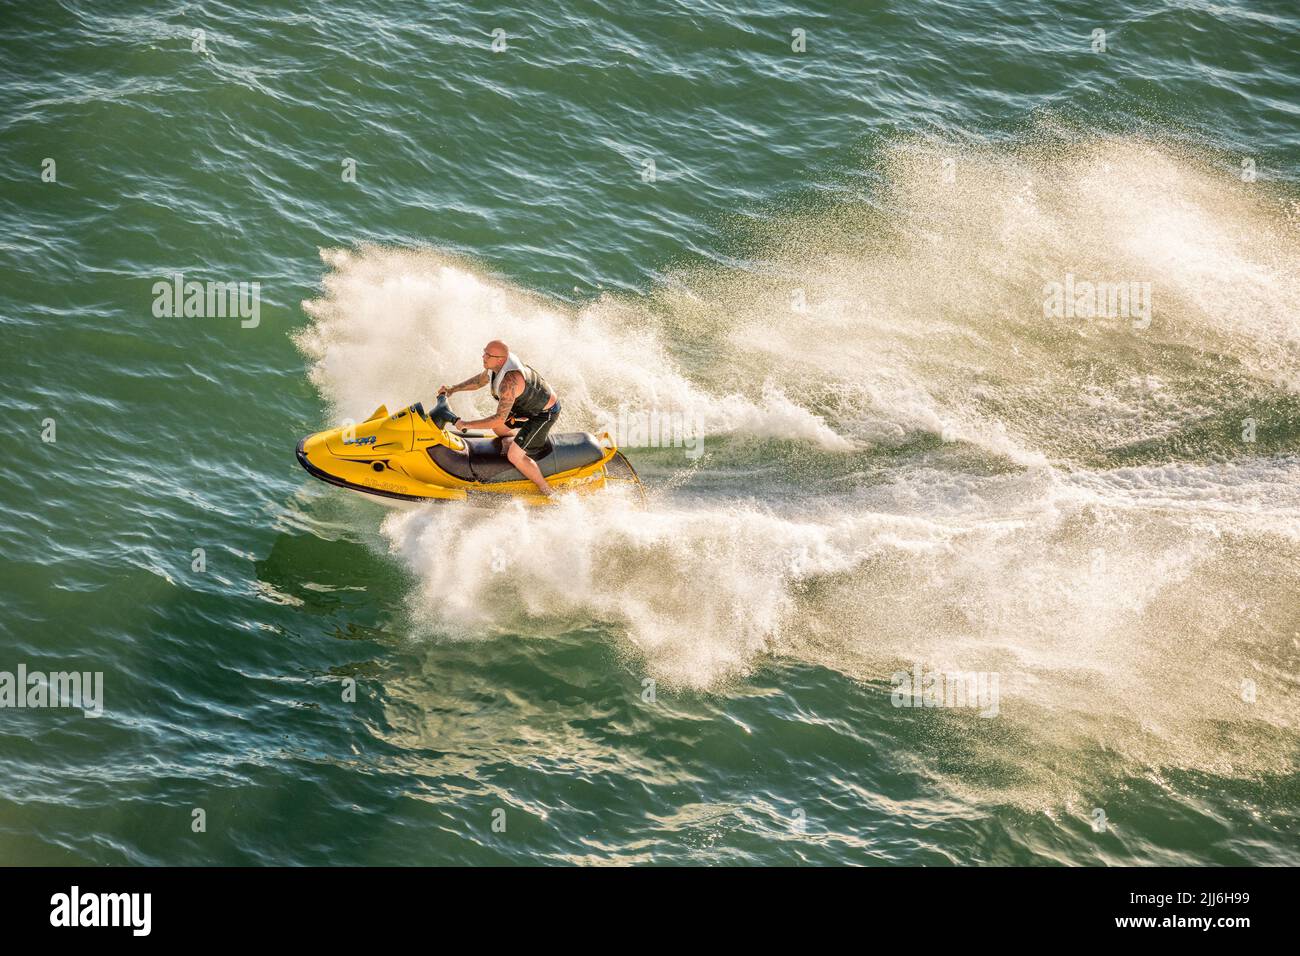 Male driving a Kawasaki 900STX jetsky in the Solent off Southampton, England. Stock Photo